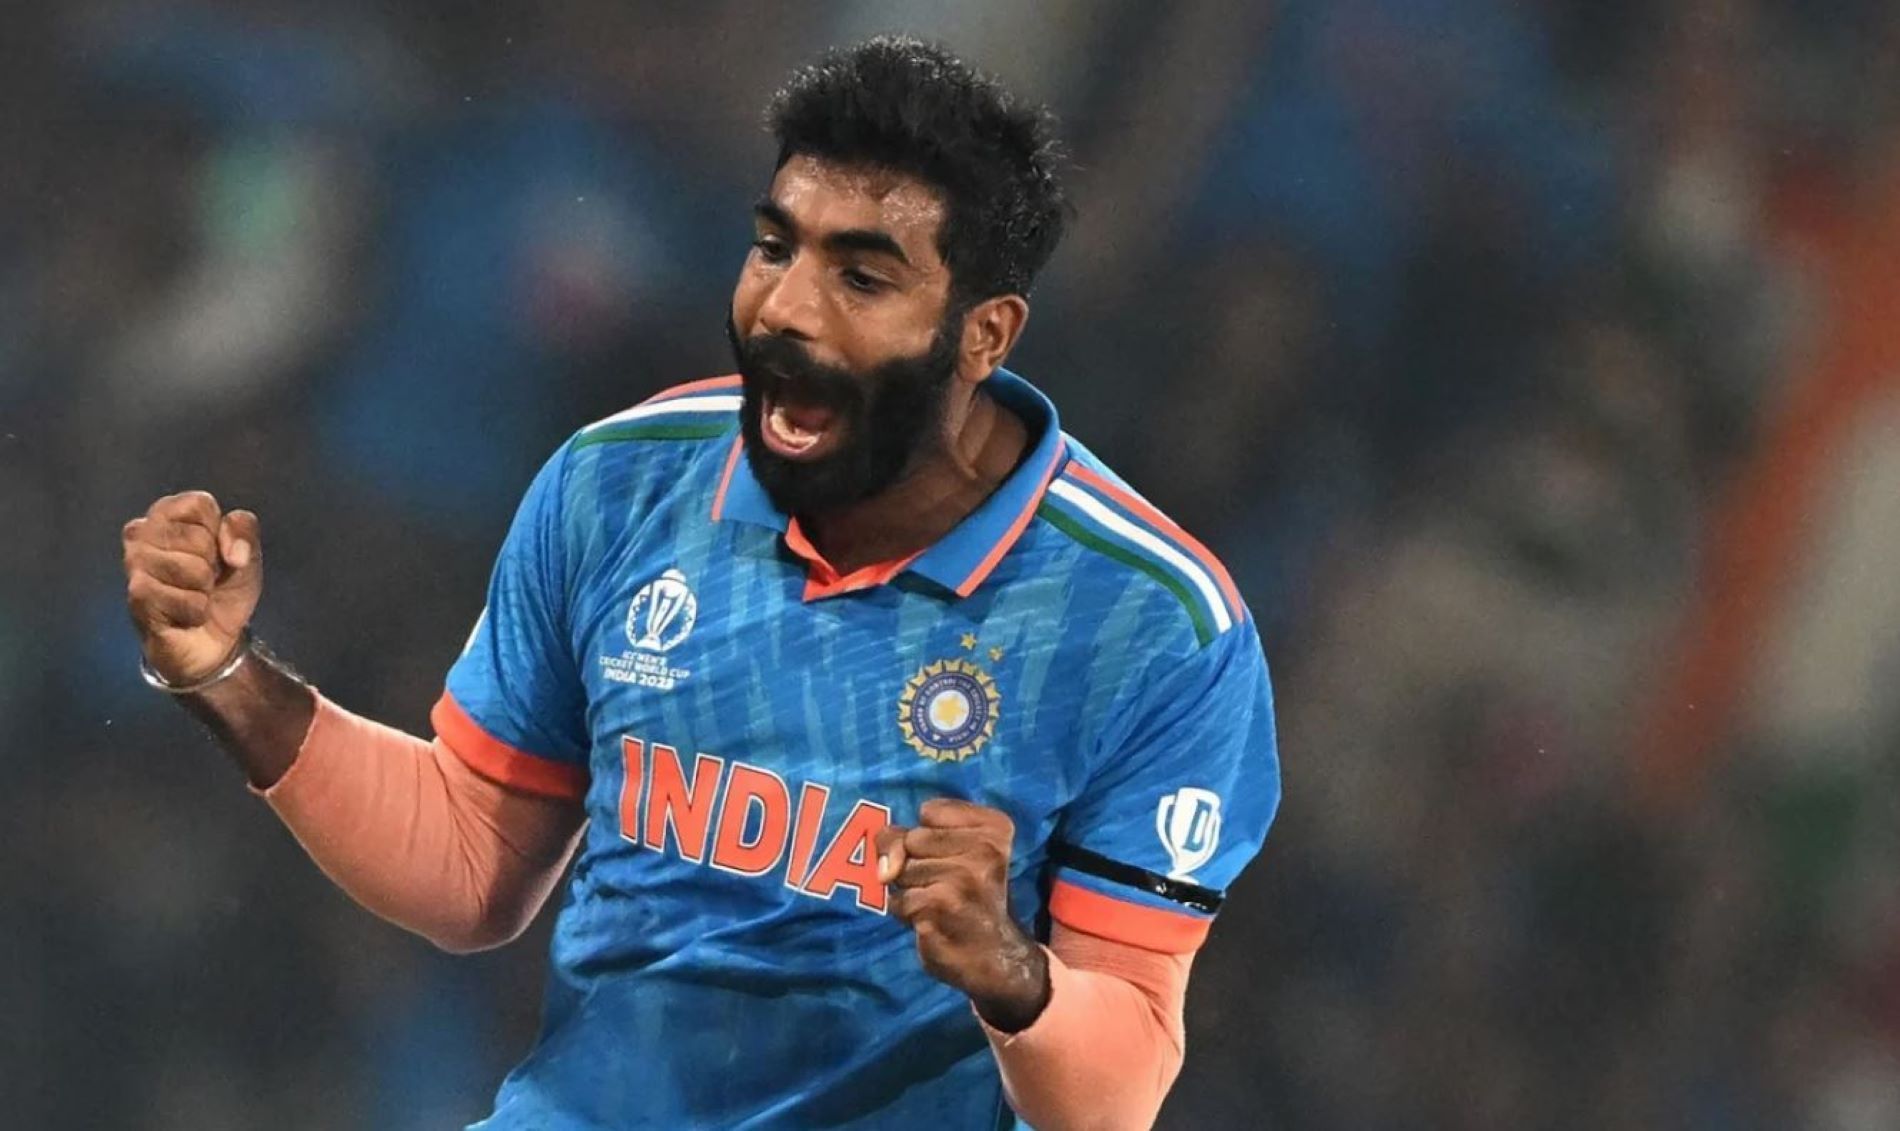 Jasprit Bumrah has been in red-hot form in the ongoing World Cup.